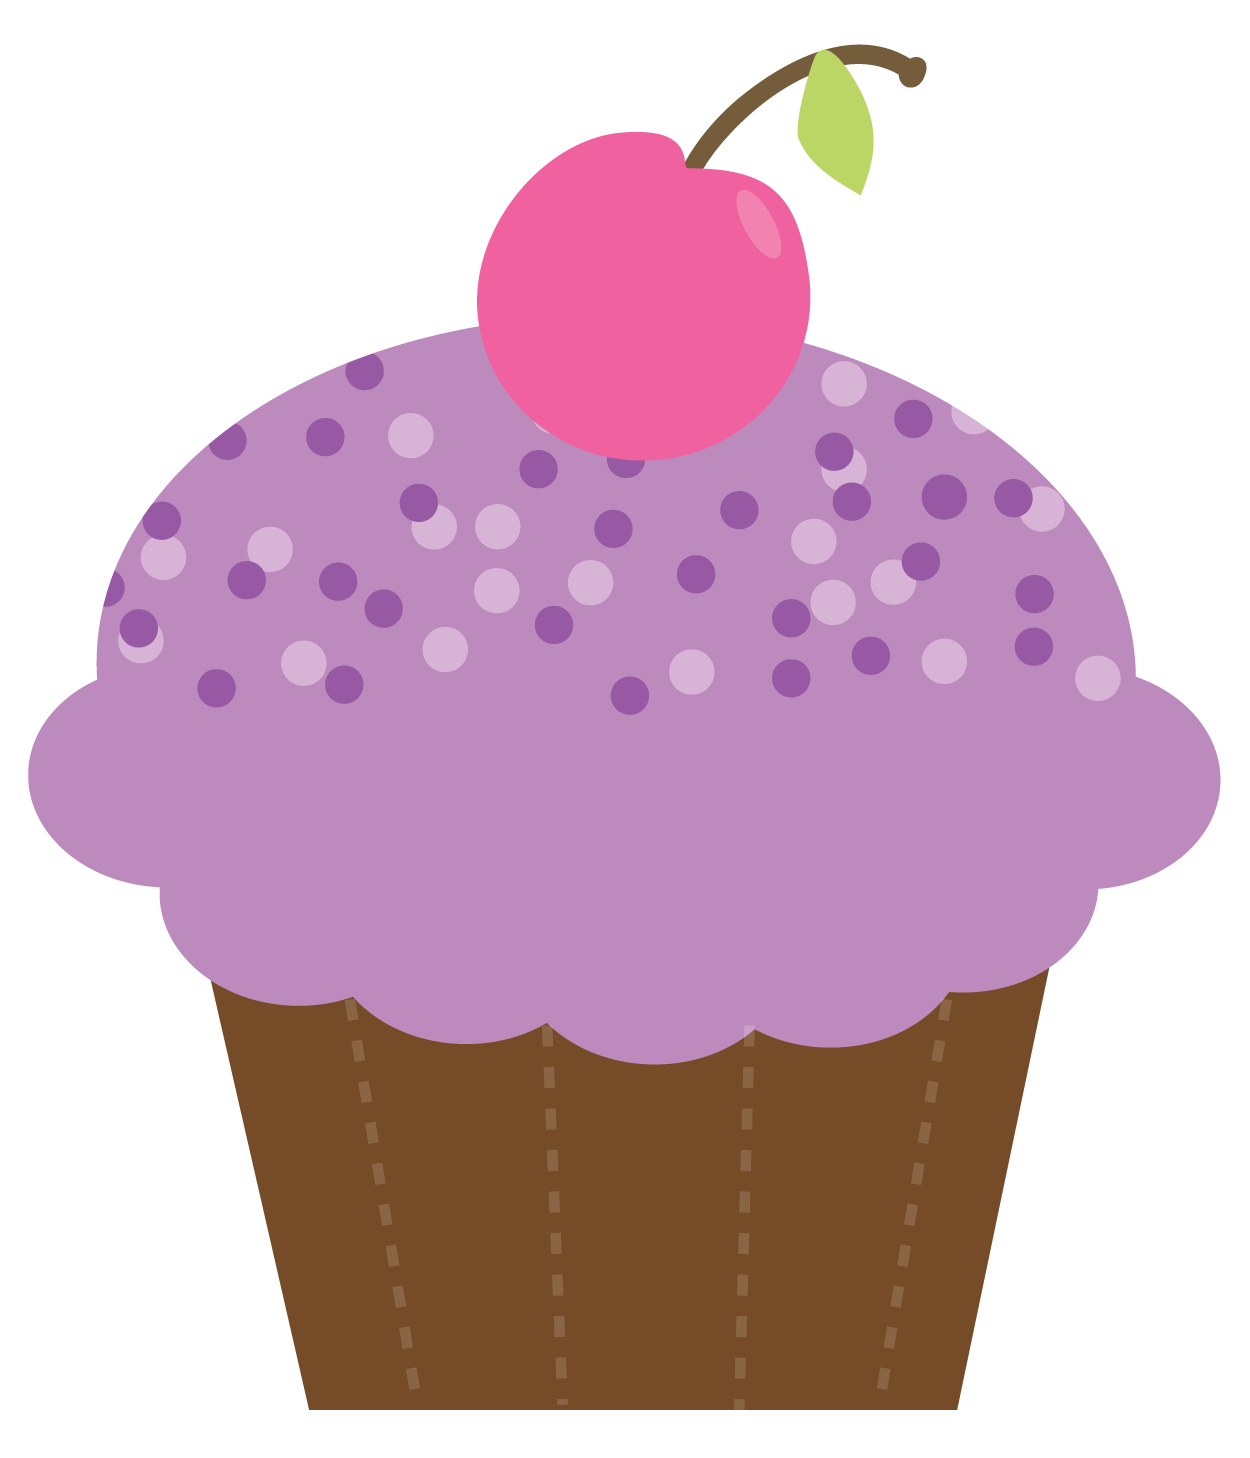 Happy Birthday Cupcake Clip Art and Nice Photo | Download Free 